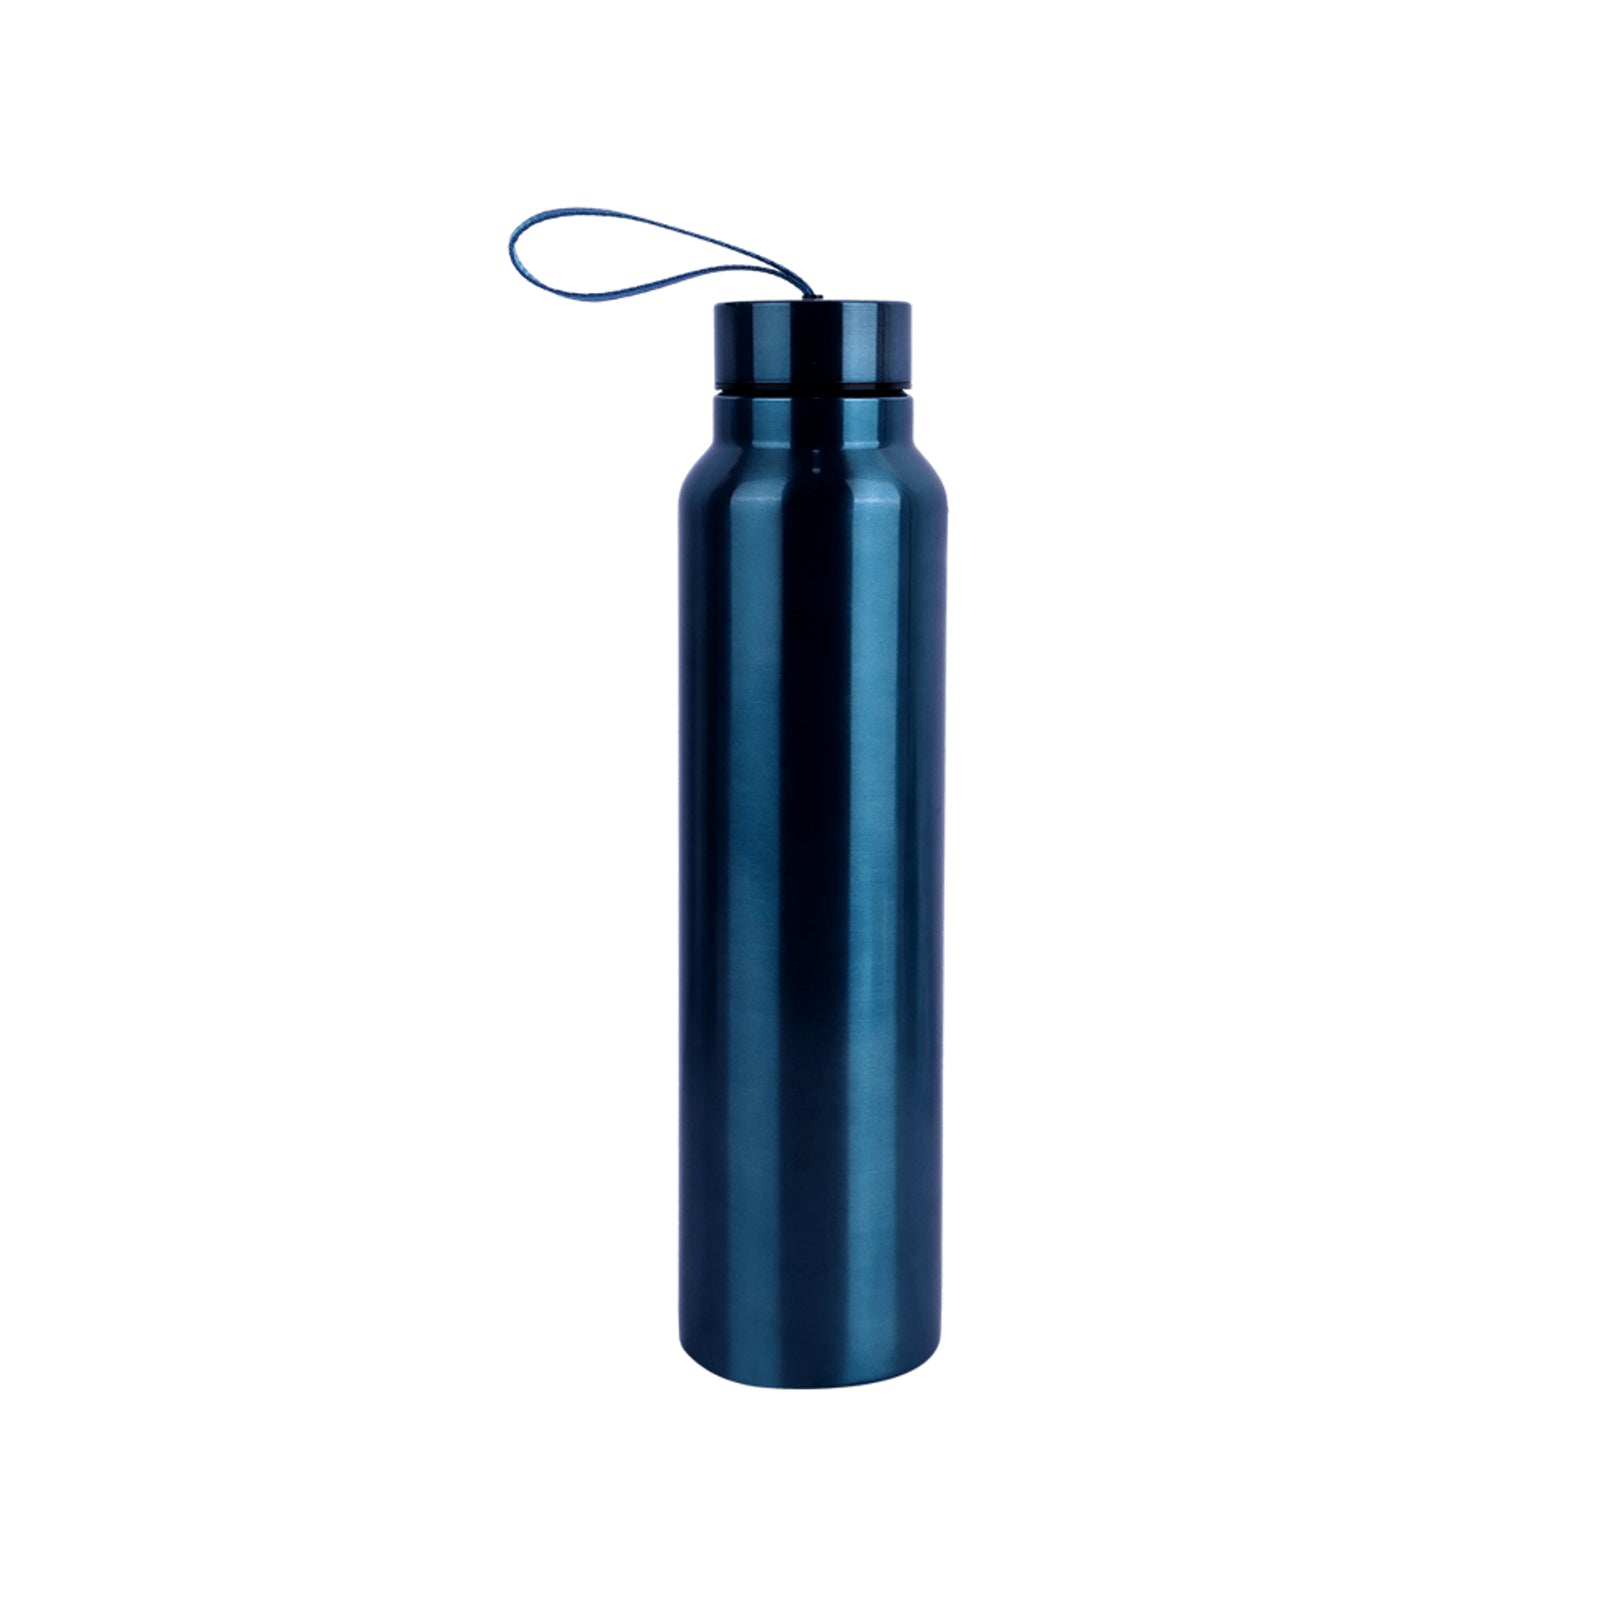 MINISO STAINLESS STEEL WATER BOTTLE WITH STRAP FOR SPORTS, 950ML ( BLUE ) 2011877610108 LIFE DEPARTMENT